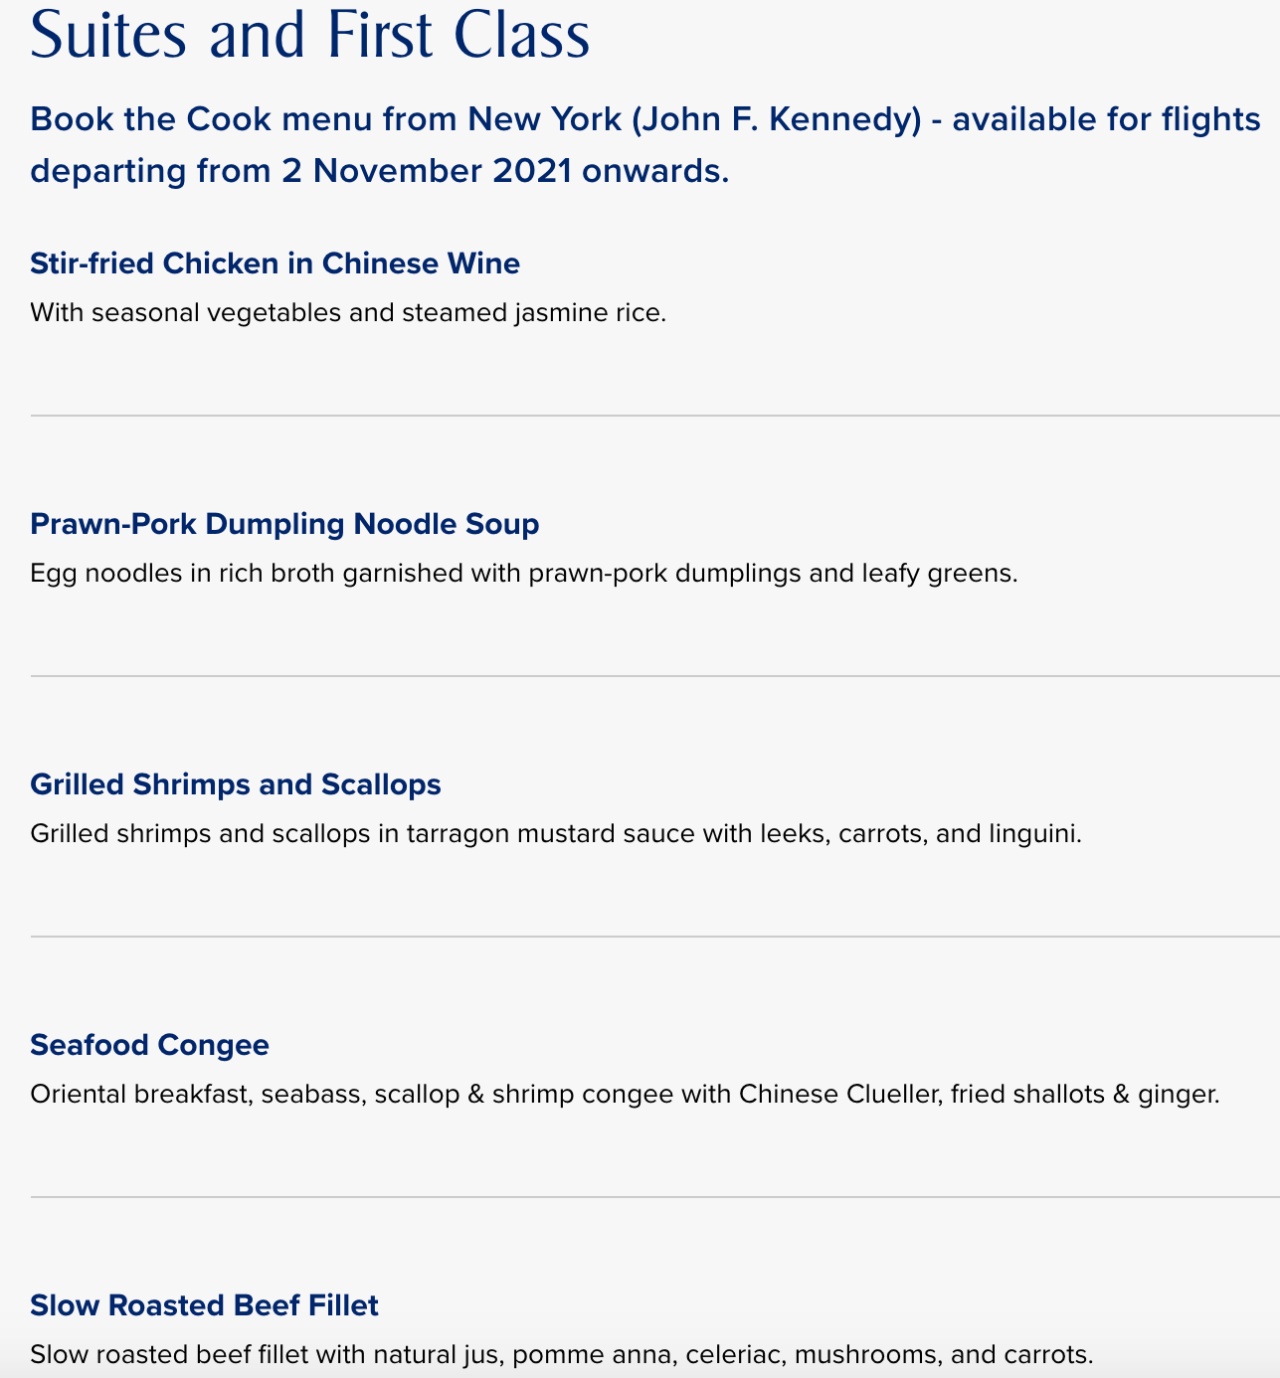 Singapore Airlines Book the Cook Menu from New York JFK from November 2, 2021